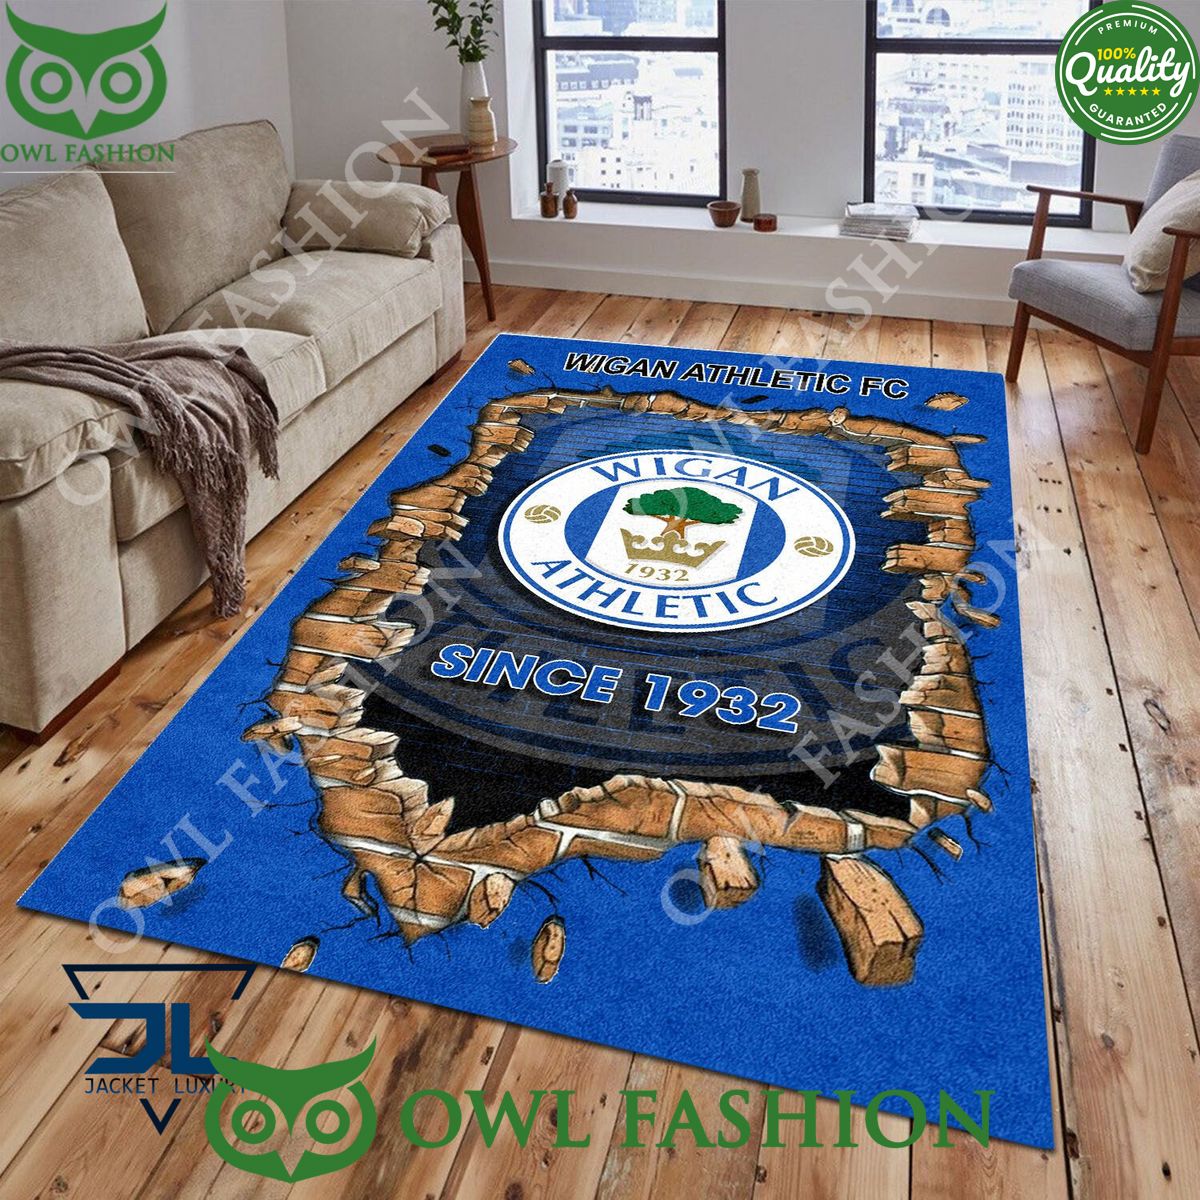 Wigan Athletic 1840 League Two Living Room Rug Carpet